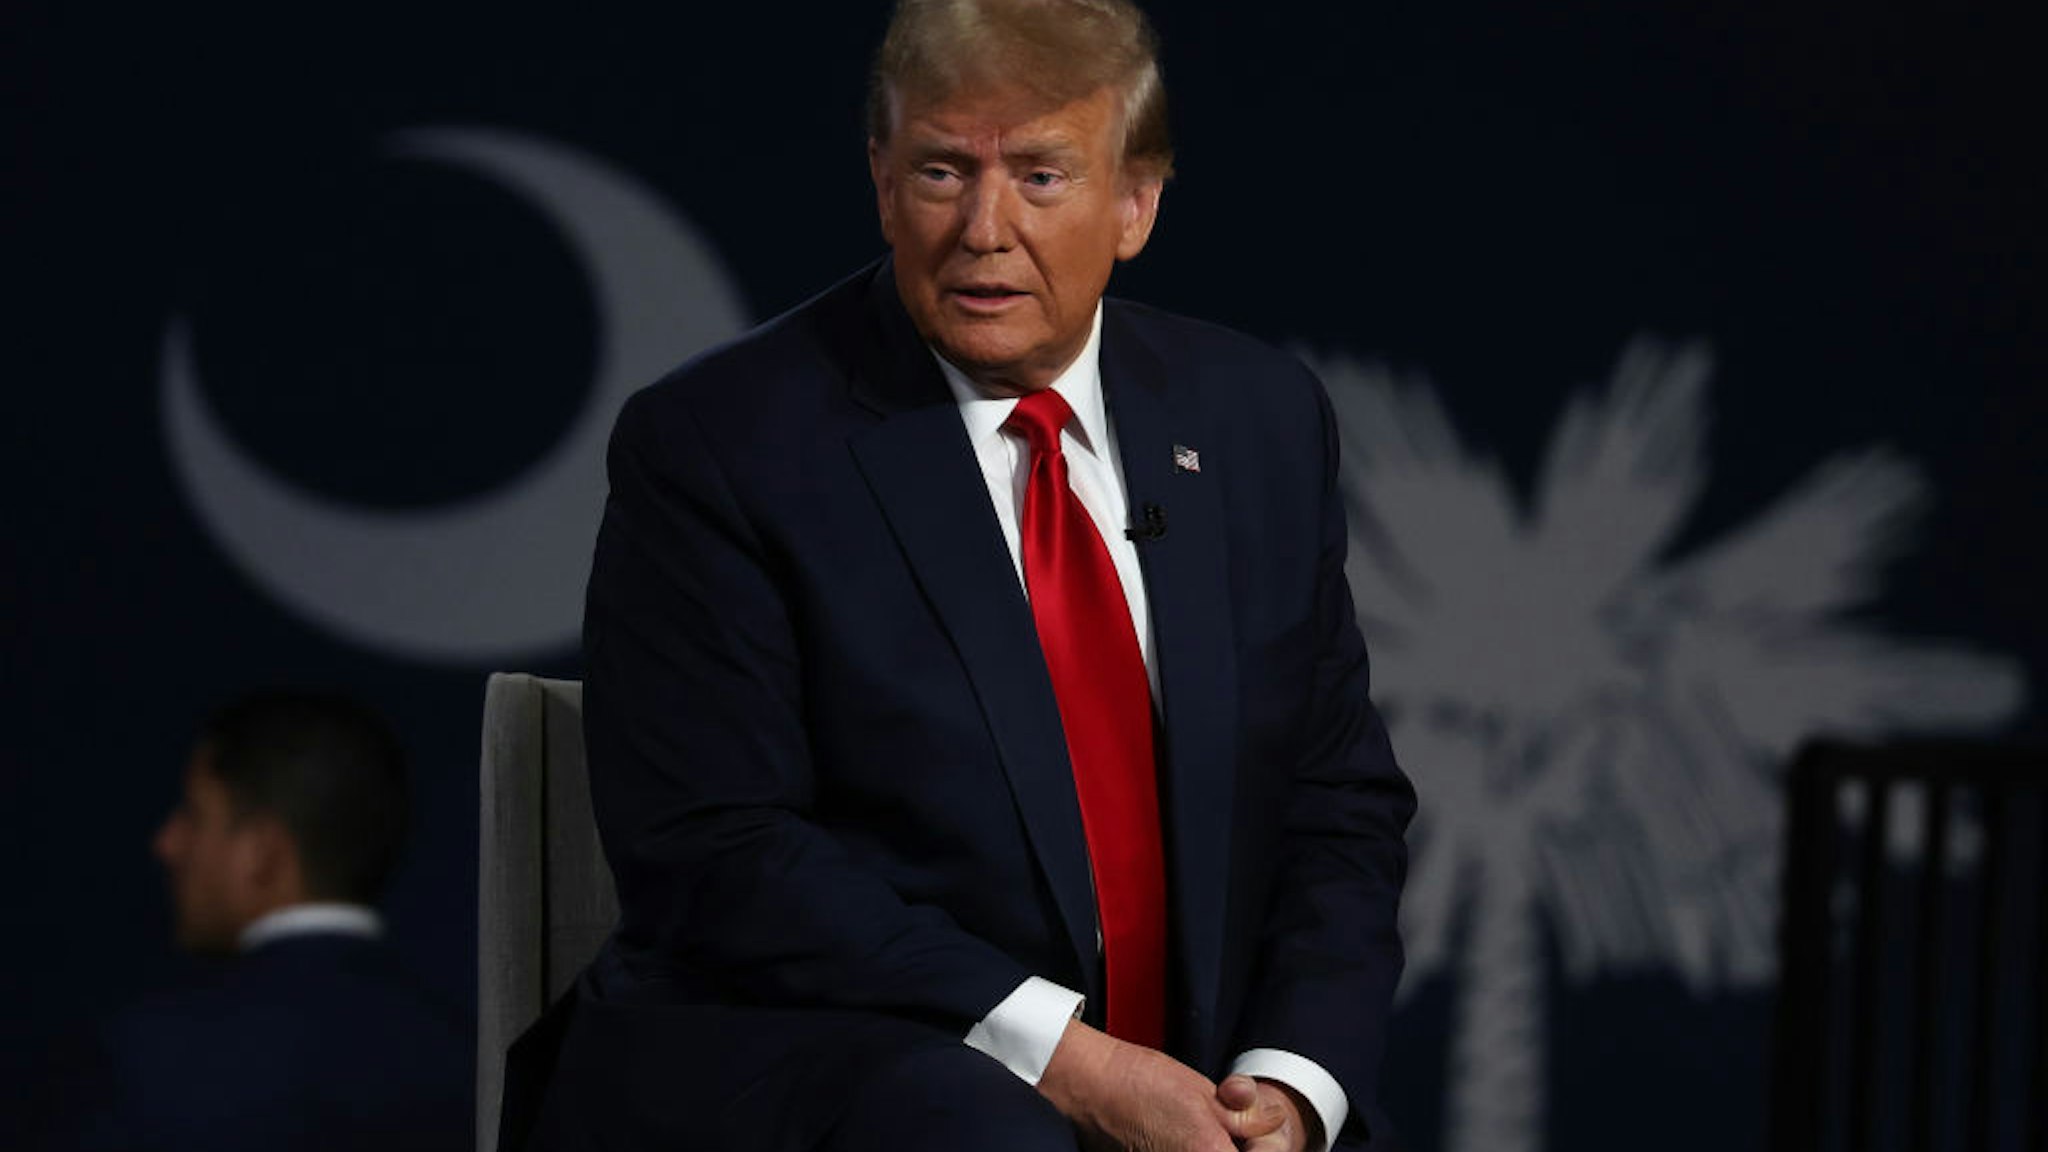 GREENVILLE, SOUTH CAROLINA - FEBRUARY 20: Republican presidential candidate, former U.S. President Donald Trump speaks during a Fox News town hall at the Greenville Convention Center on February 20, 2024 in Greenville, South Carolina. South Carolina holds its Republican primary on February 24. (Photo by Justin Sullivan/Getty Images)